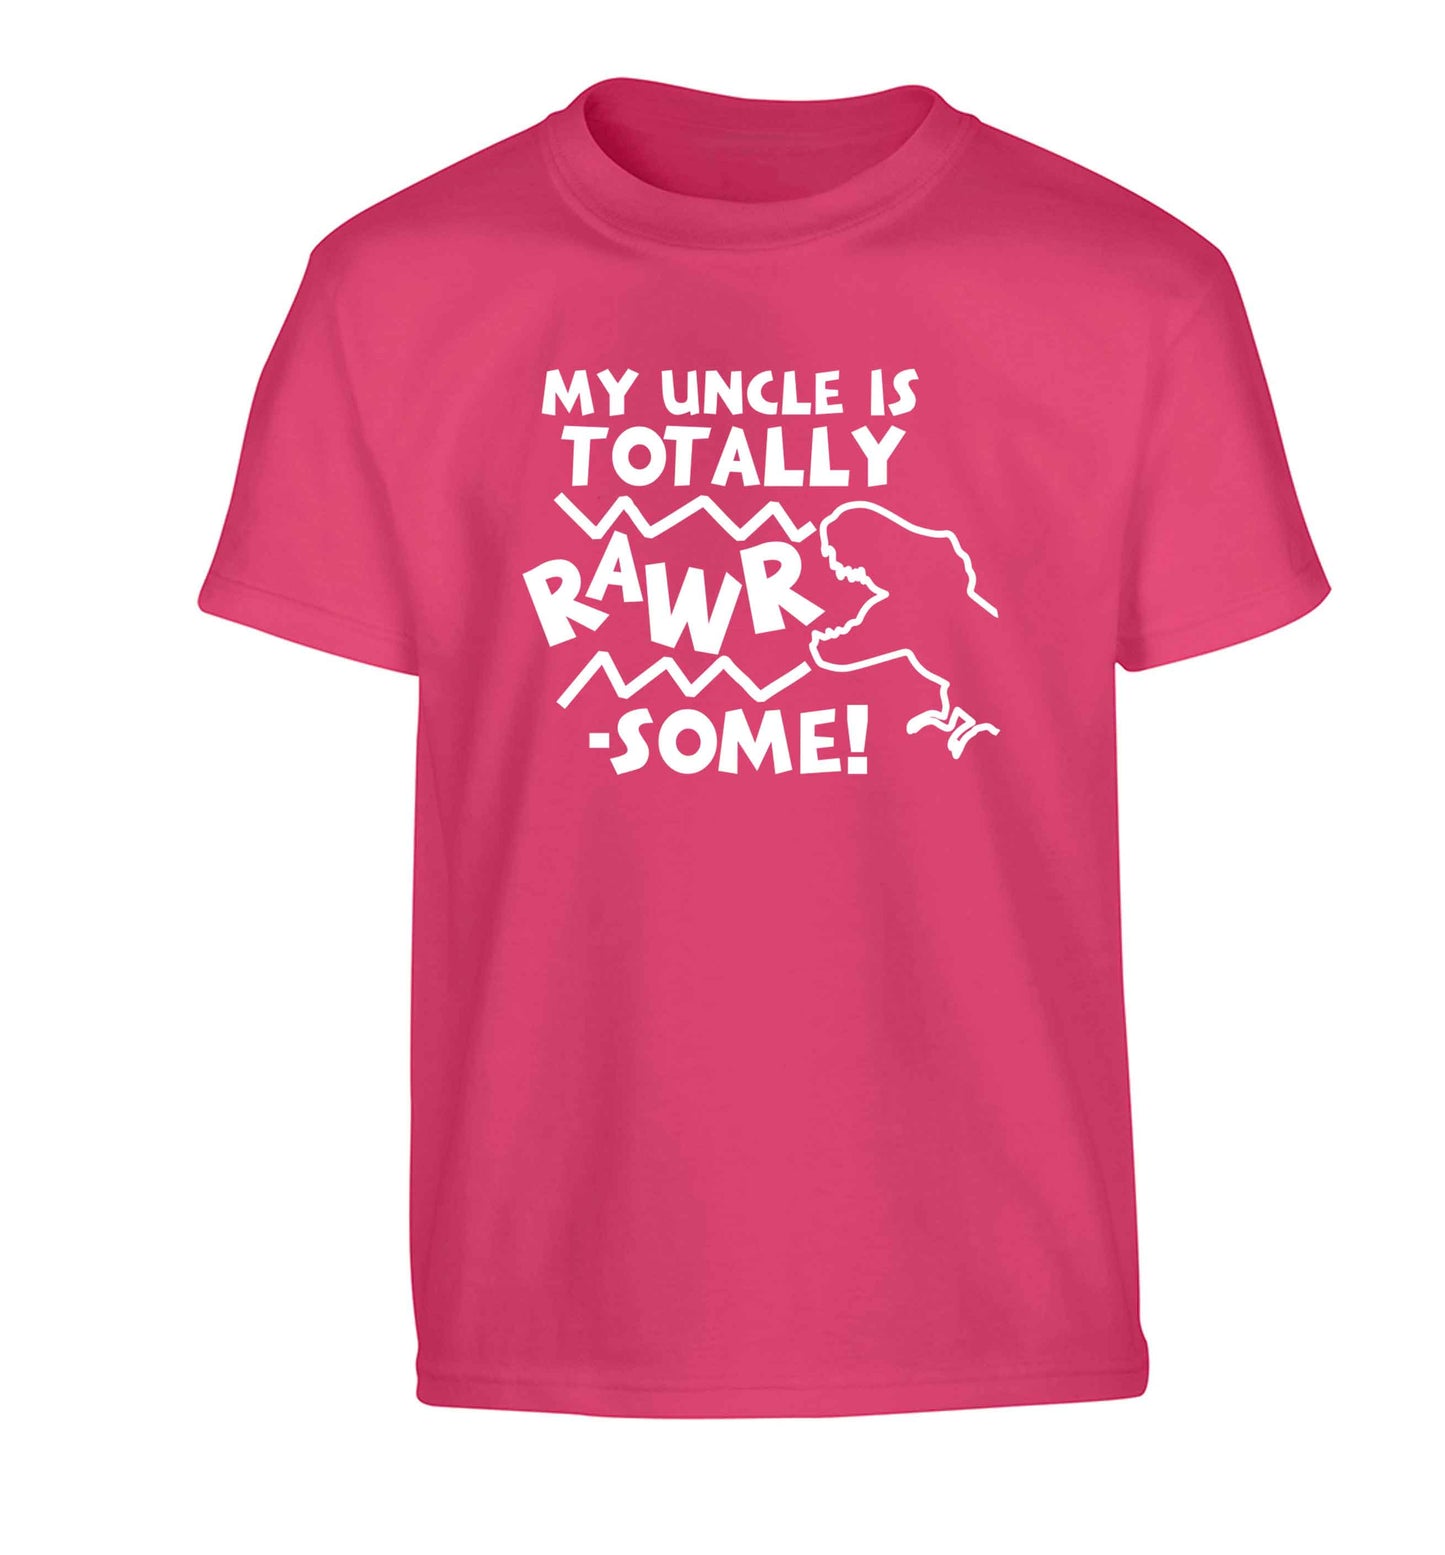 My uncle is totally rawrsome Children's pink Tshirt 12-13 Years